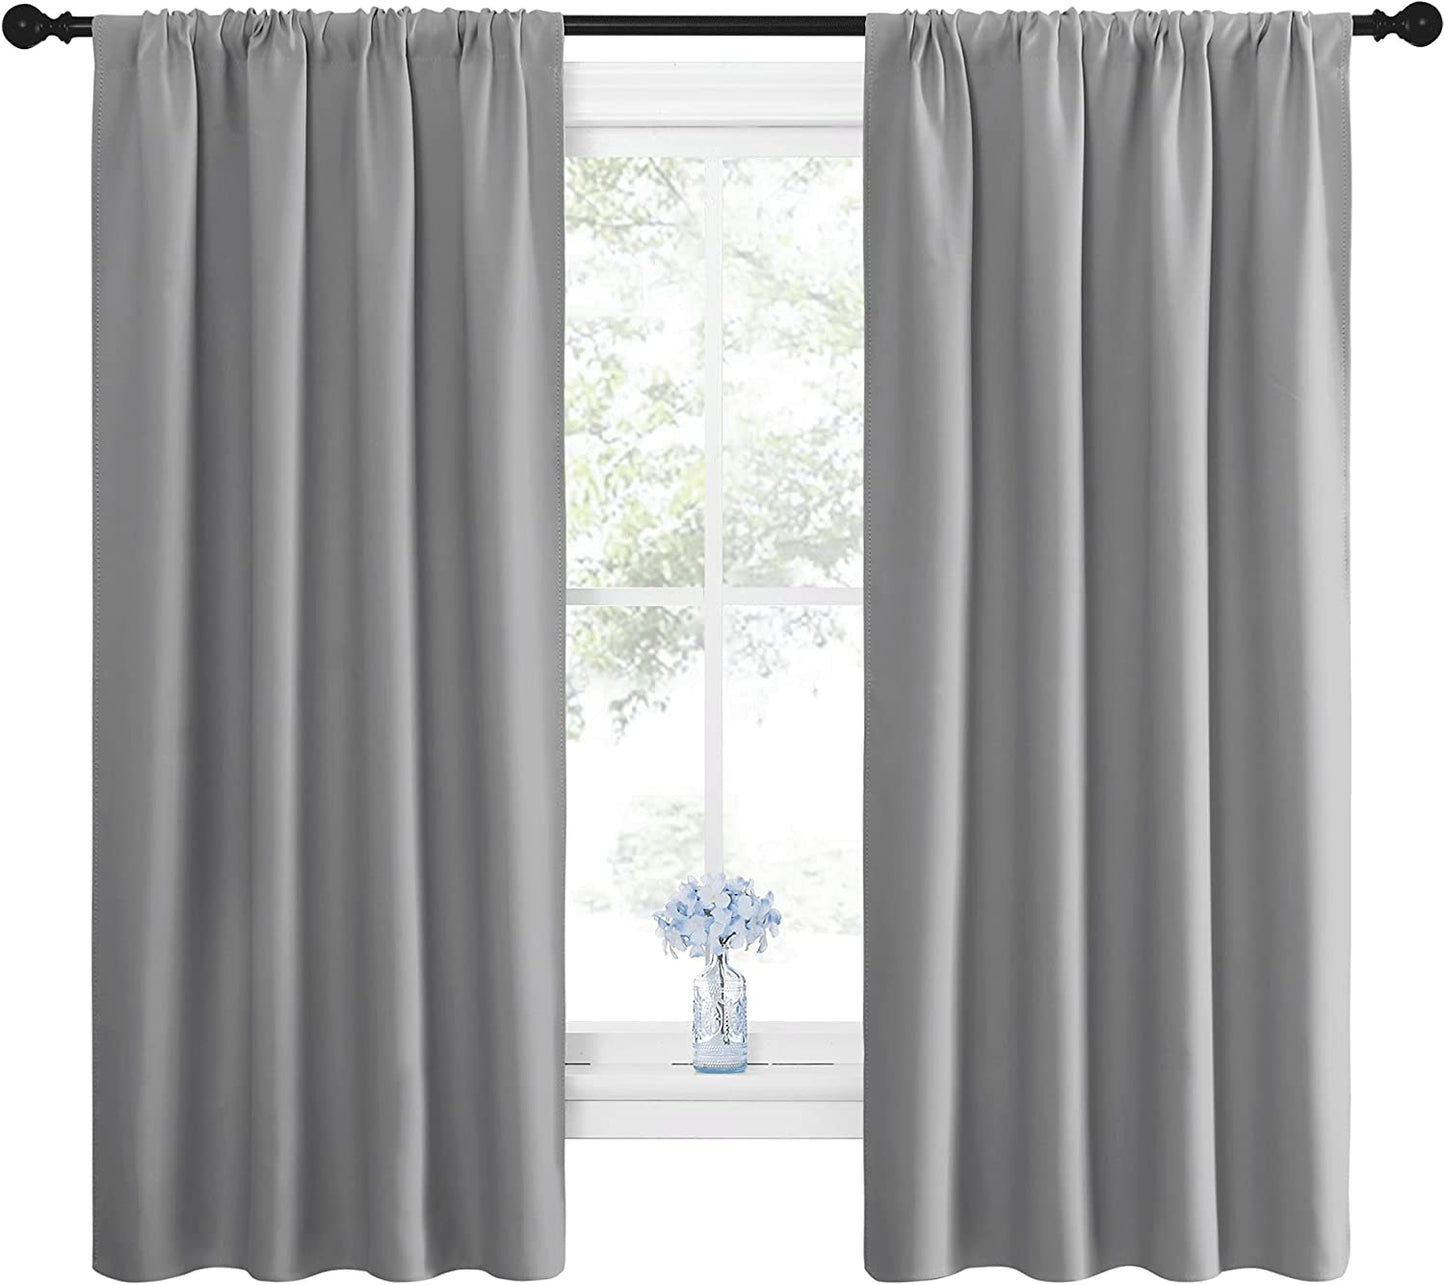 Wemoh Black Blackout Curtain Blinds - Solid Thermal Insulated Window Treatment Blackout Drapes/Draperies for Bedroom (2 Panels, 42 inches Wide by 63 inches Long)